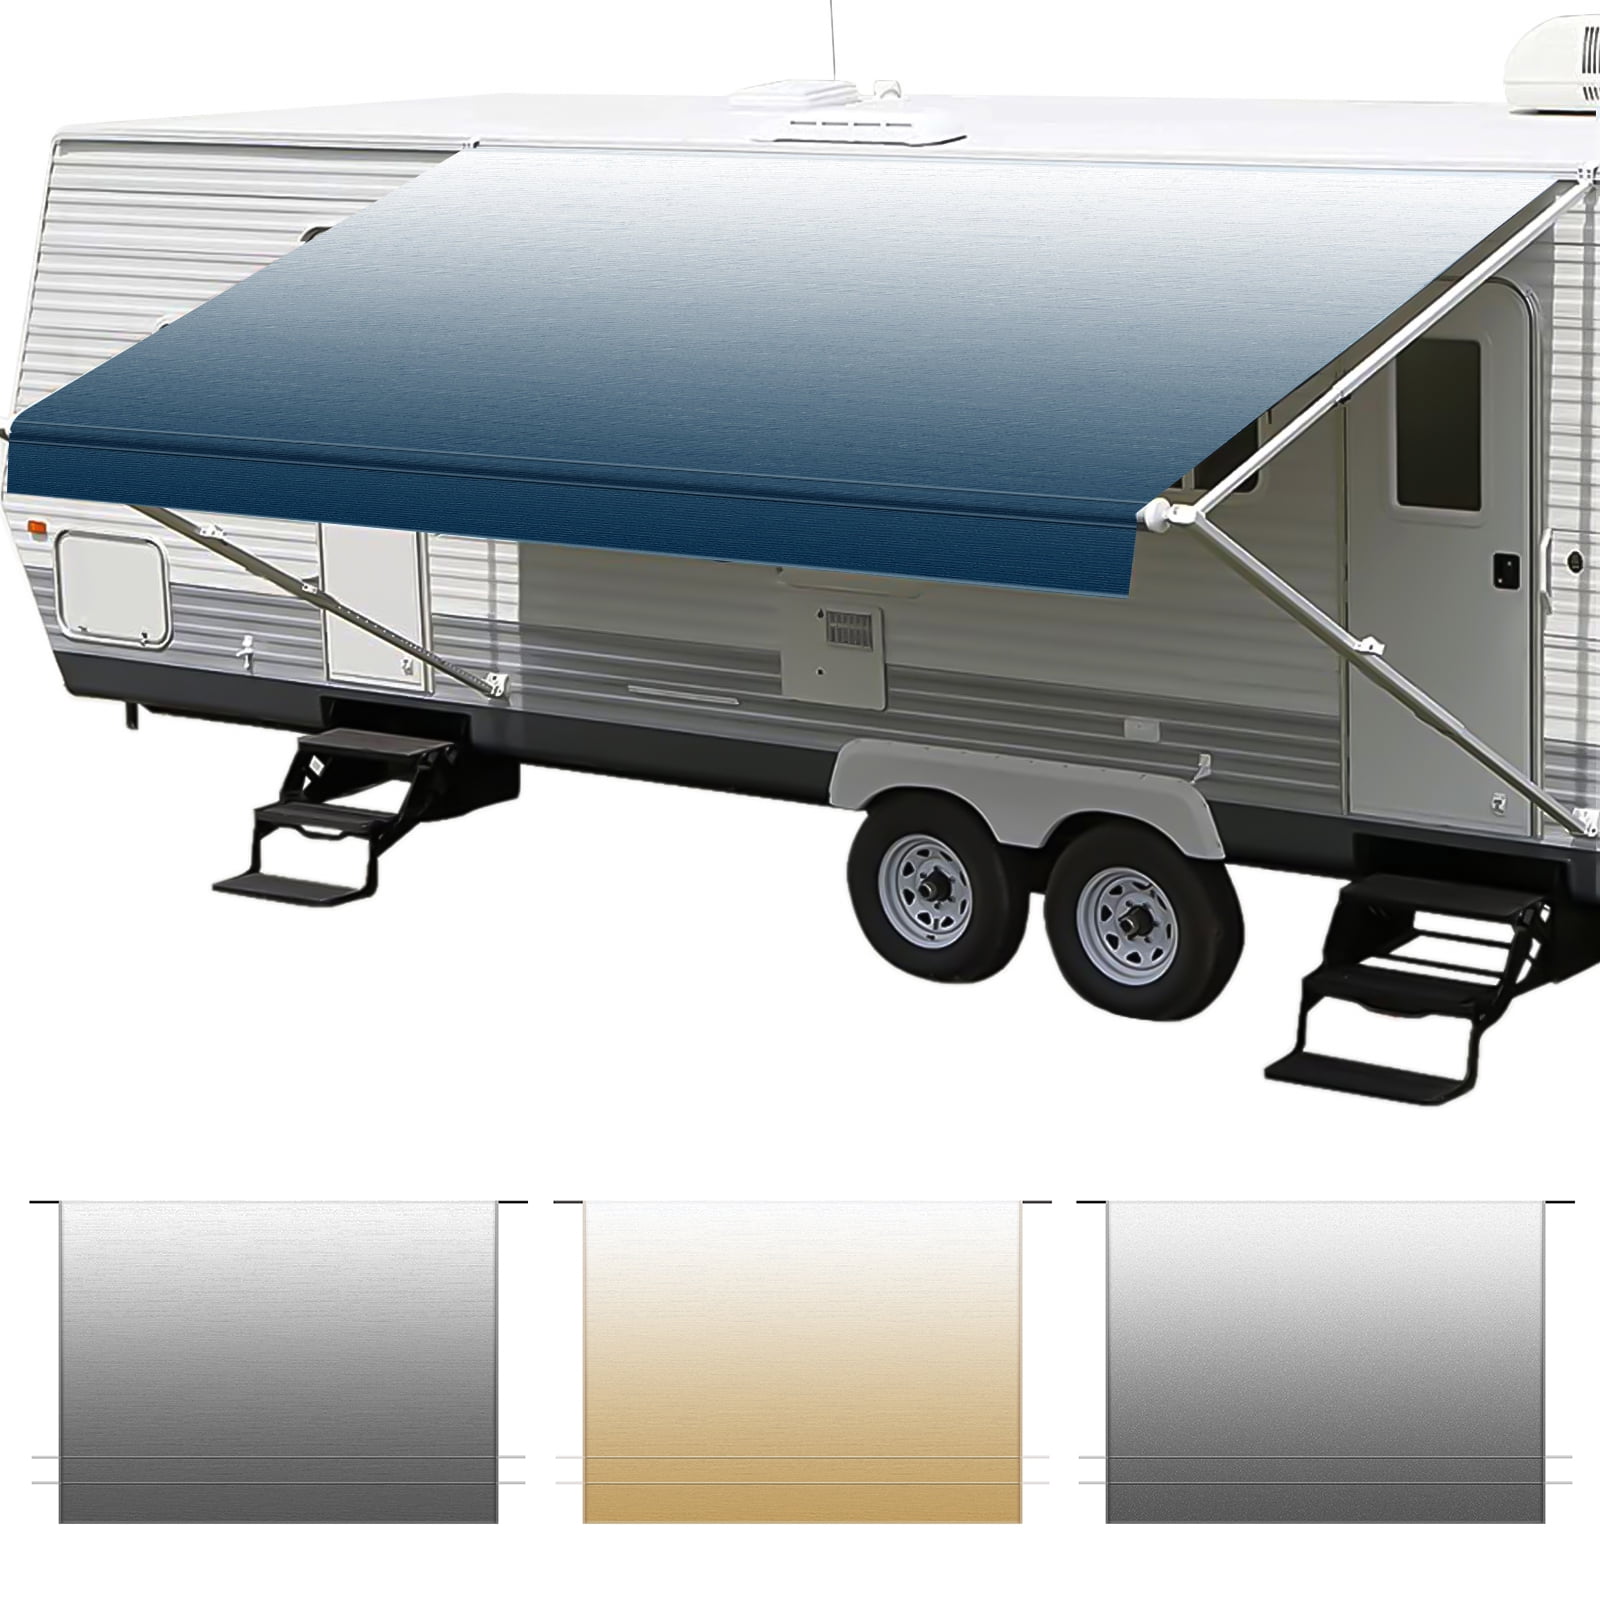 Universal Outdoor Canopy for Camper Fabric 12' 2 and Motorhome Awnings ShadePro Trailer Premium Grade Weatherproof Vinyl RV Awning Fabric Replacement Dune Fade 13'